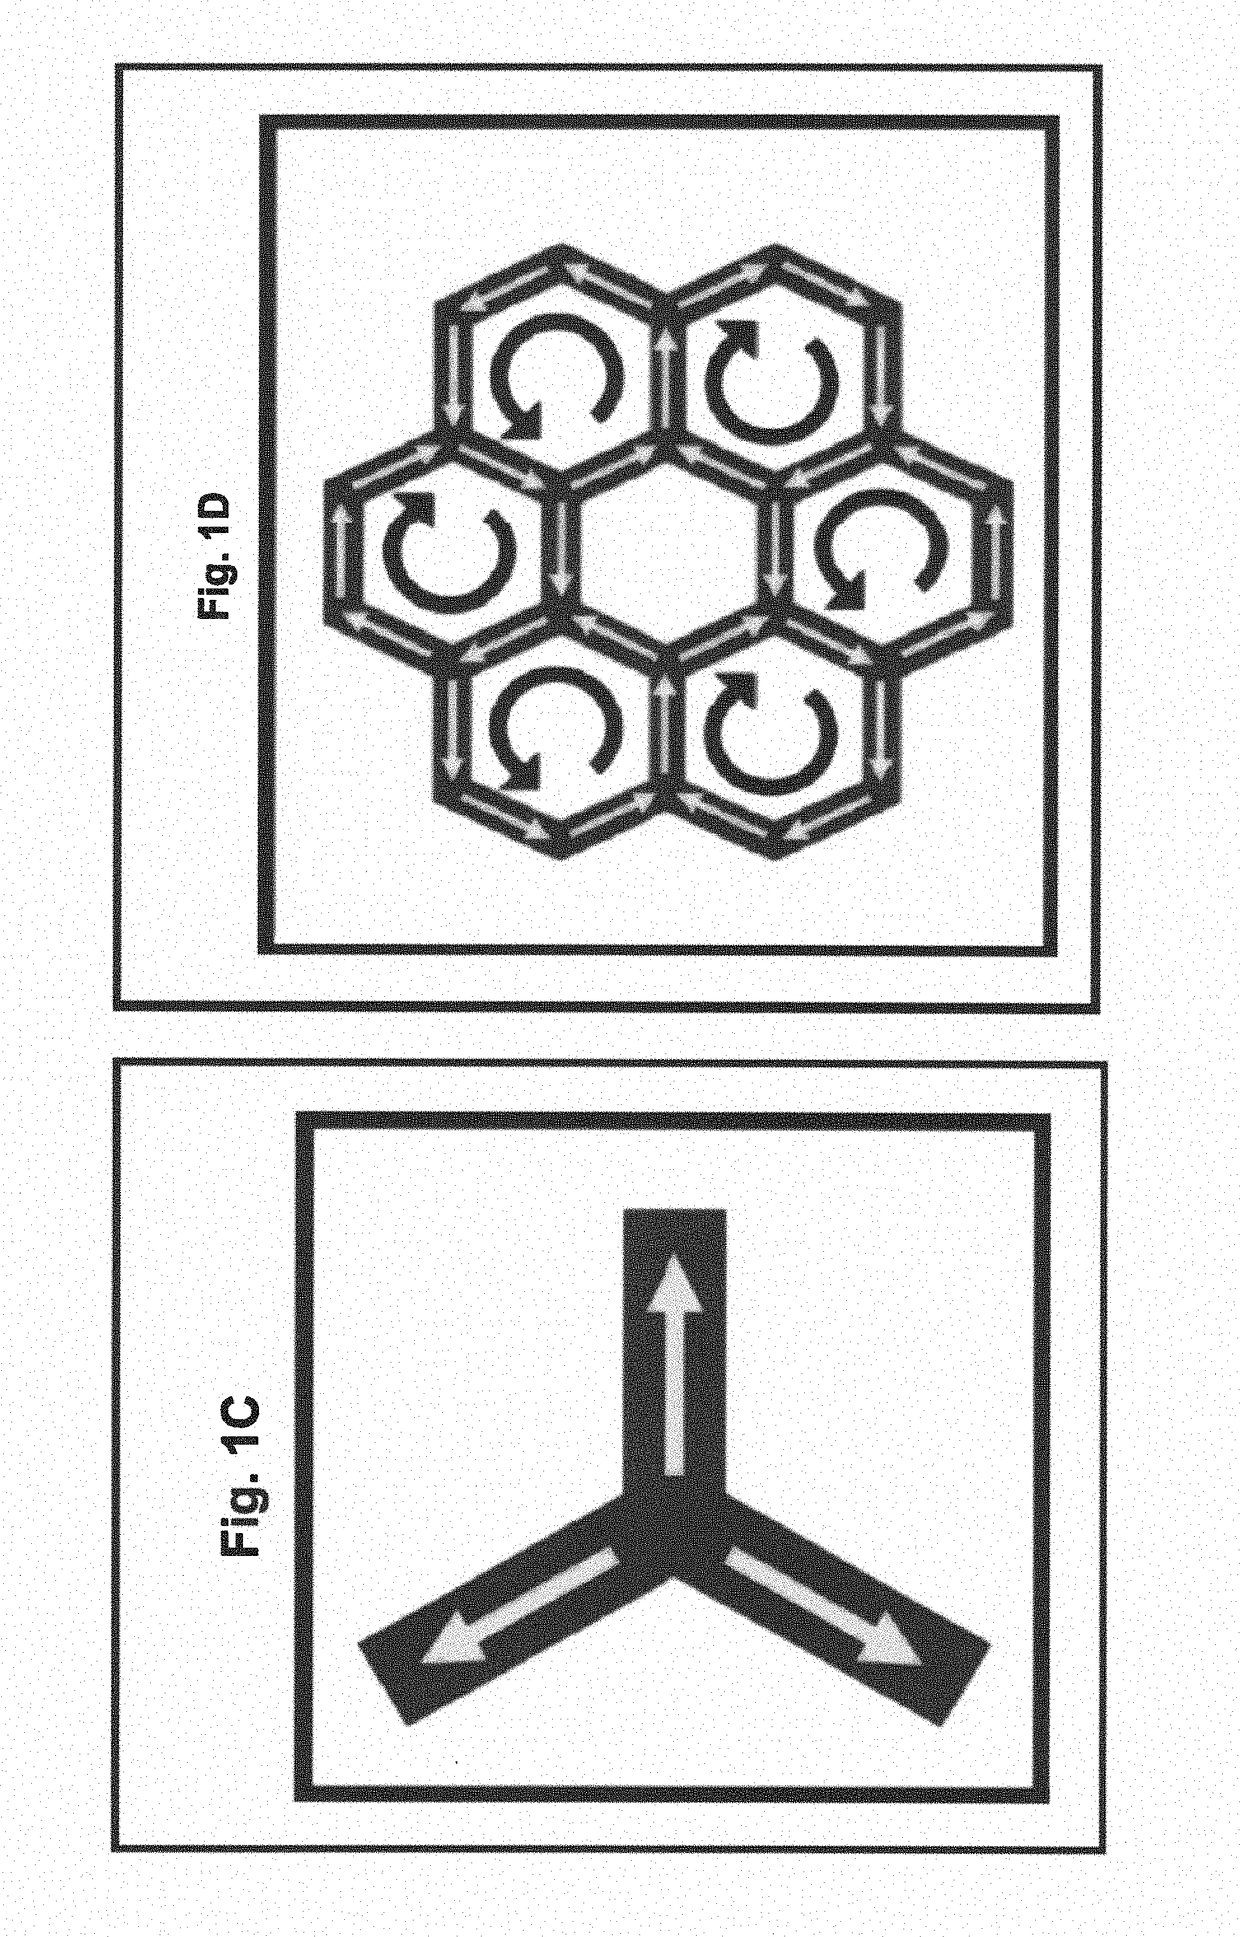 Magnetic Diode in Artificial Magnetic Honeycomb Lattice